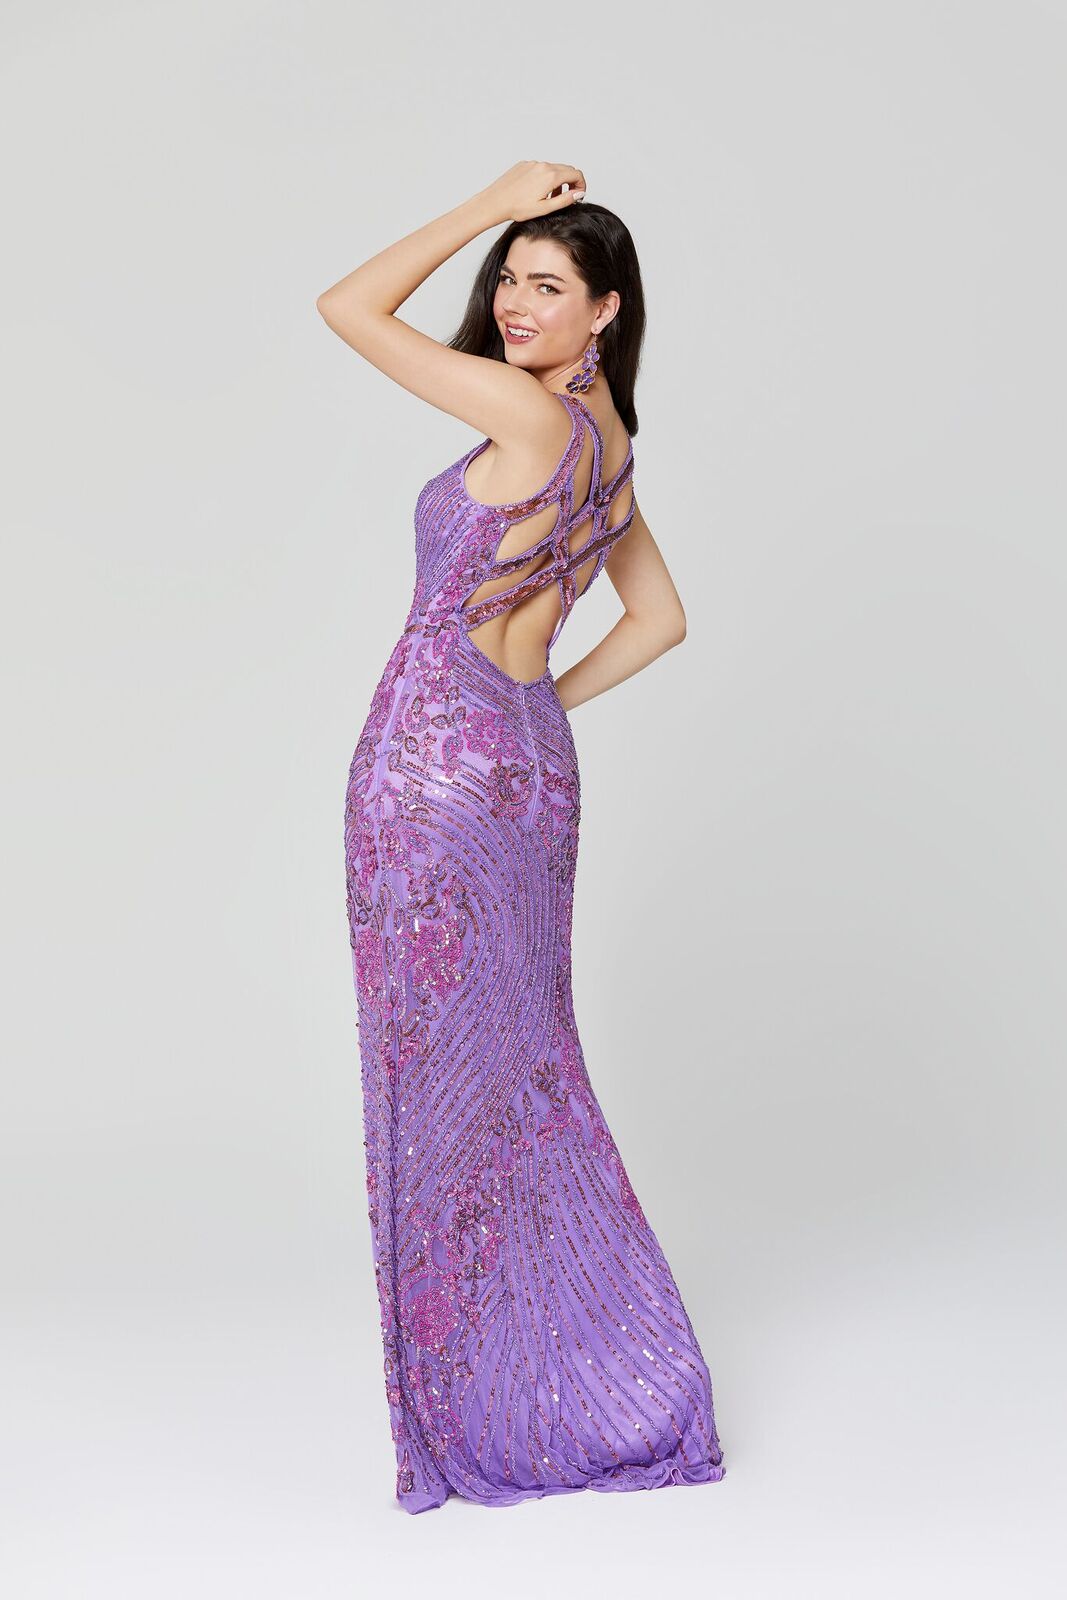 Primavera Couture 3412 v neckline sequin beaded evening gown with beaded belt waistline and side slit.  This prom dress features multiple straps that cross in the open back. Great for prom or pageant. 